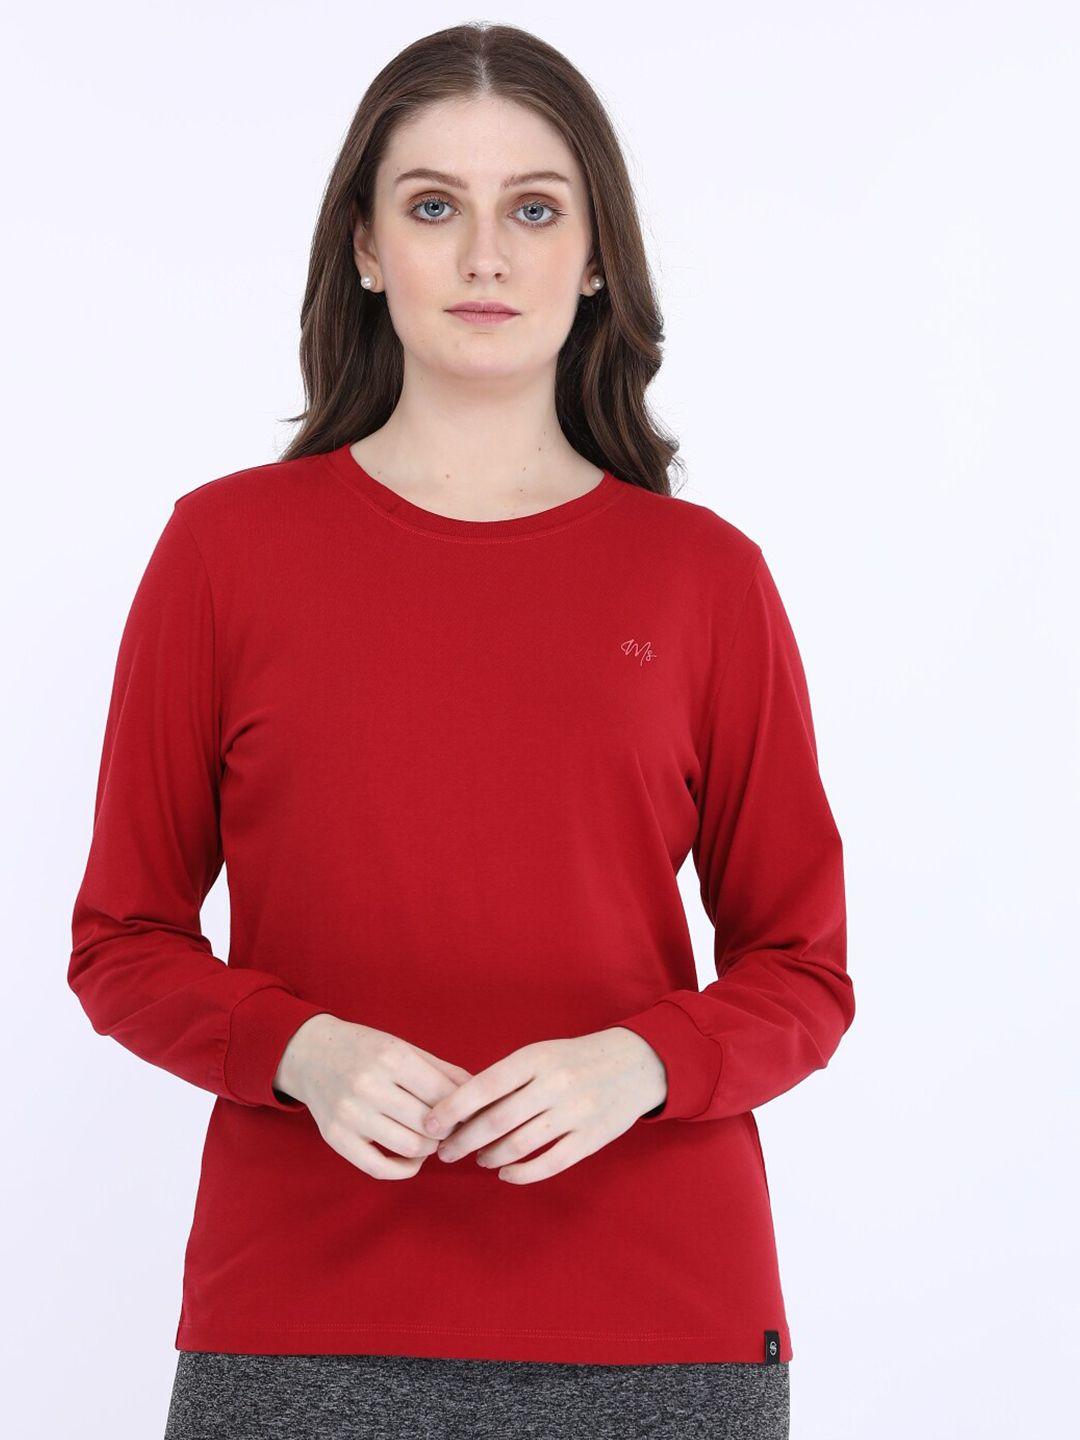 maysixty-women-red-pure-cotton-t-shirt